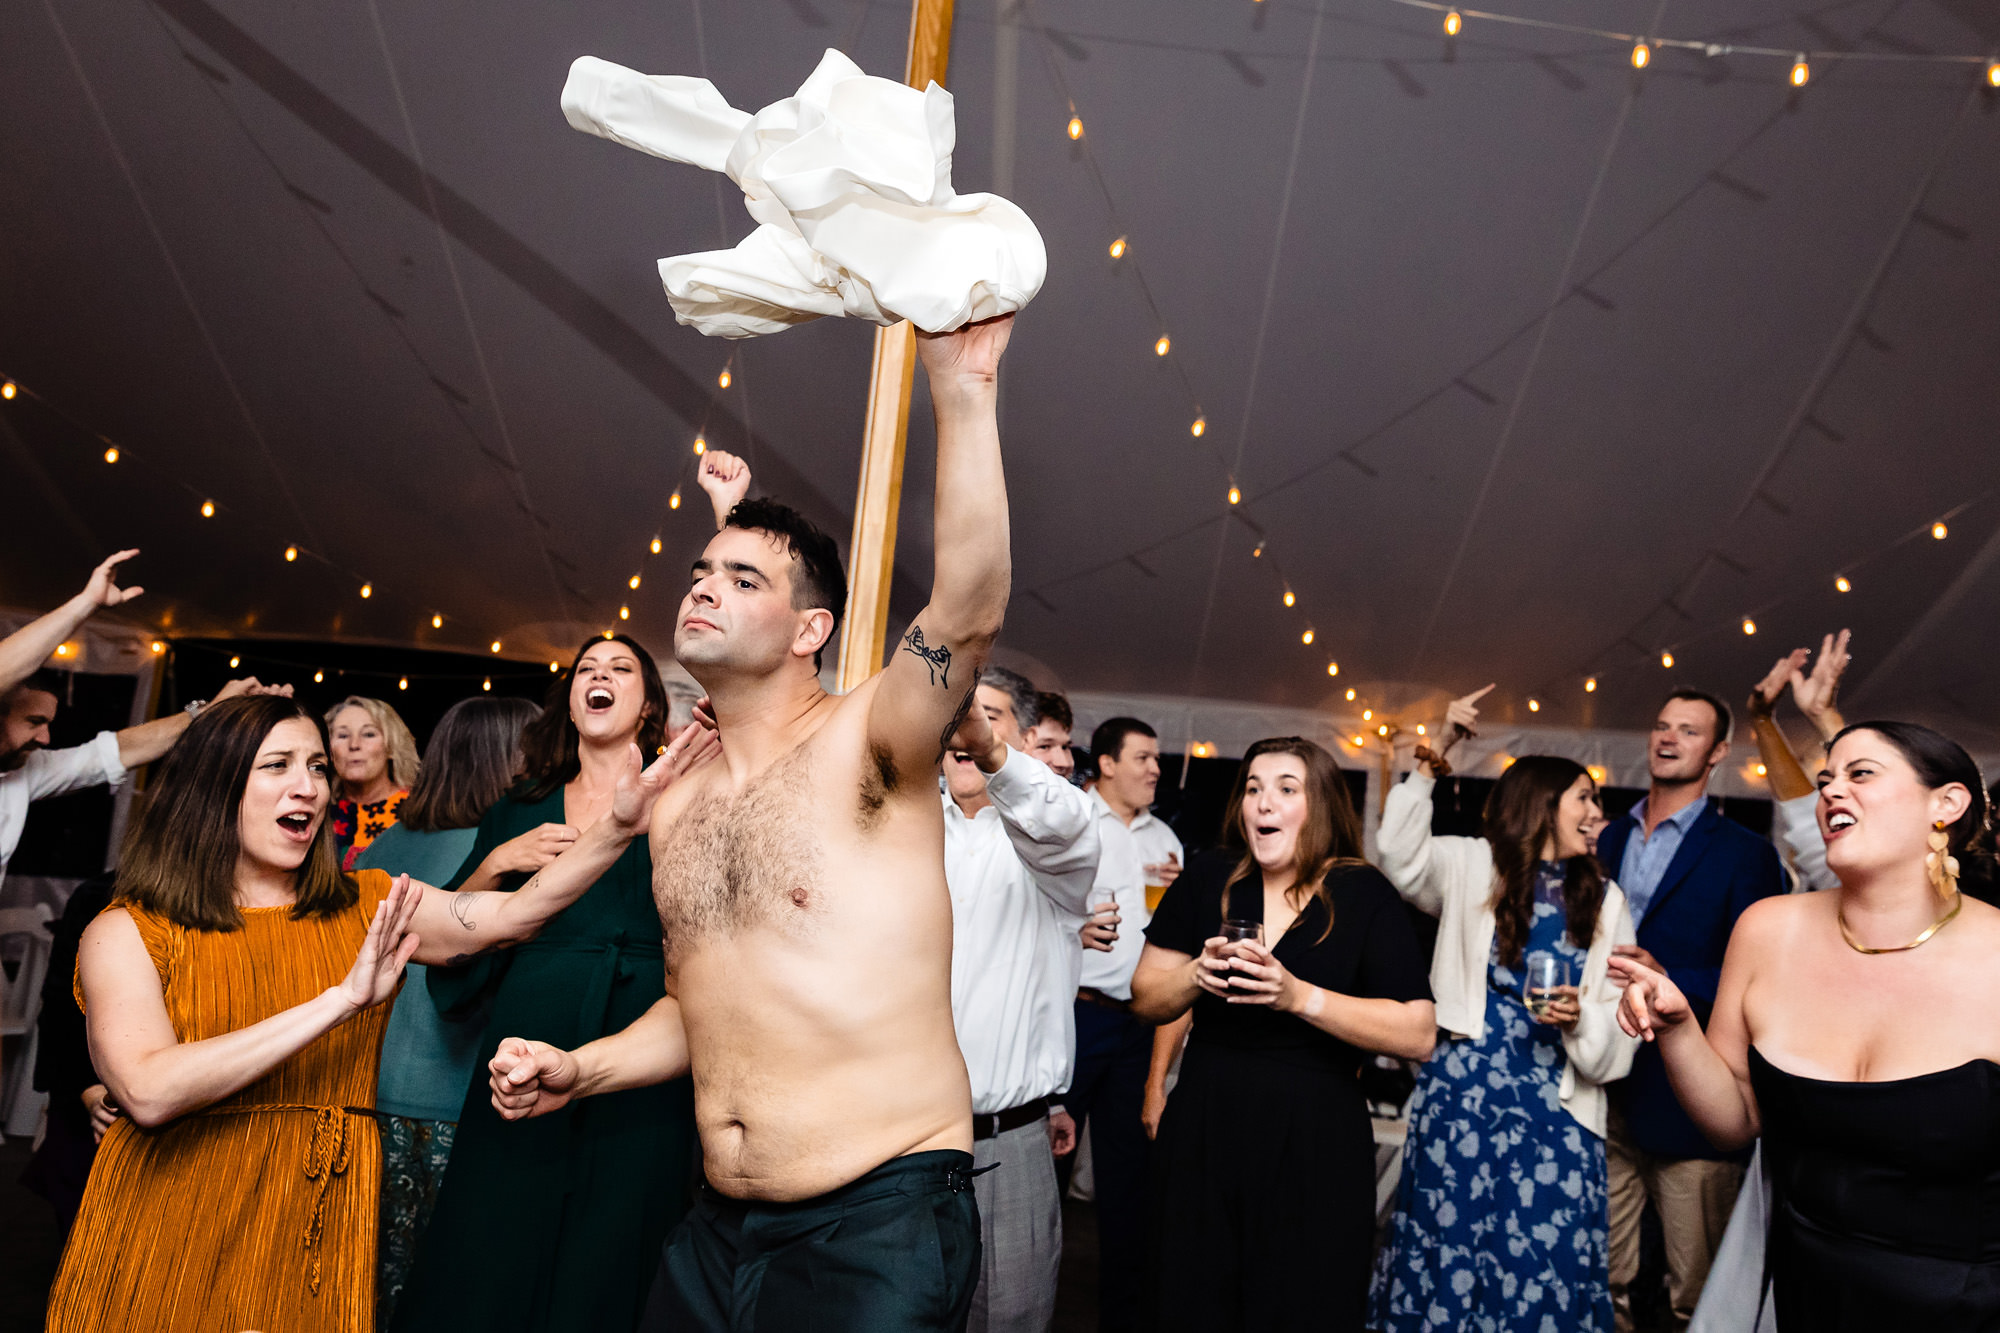 A groom takes off his shirt on the dance floor and guests react in shock and laughter.